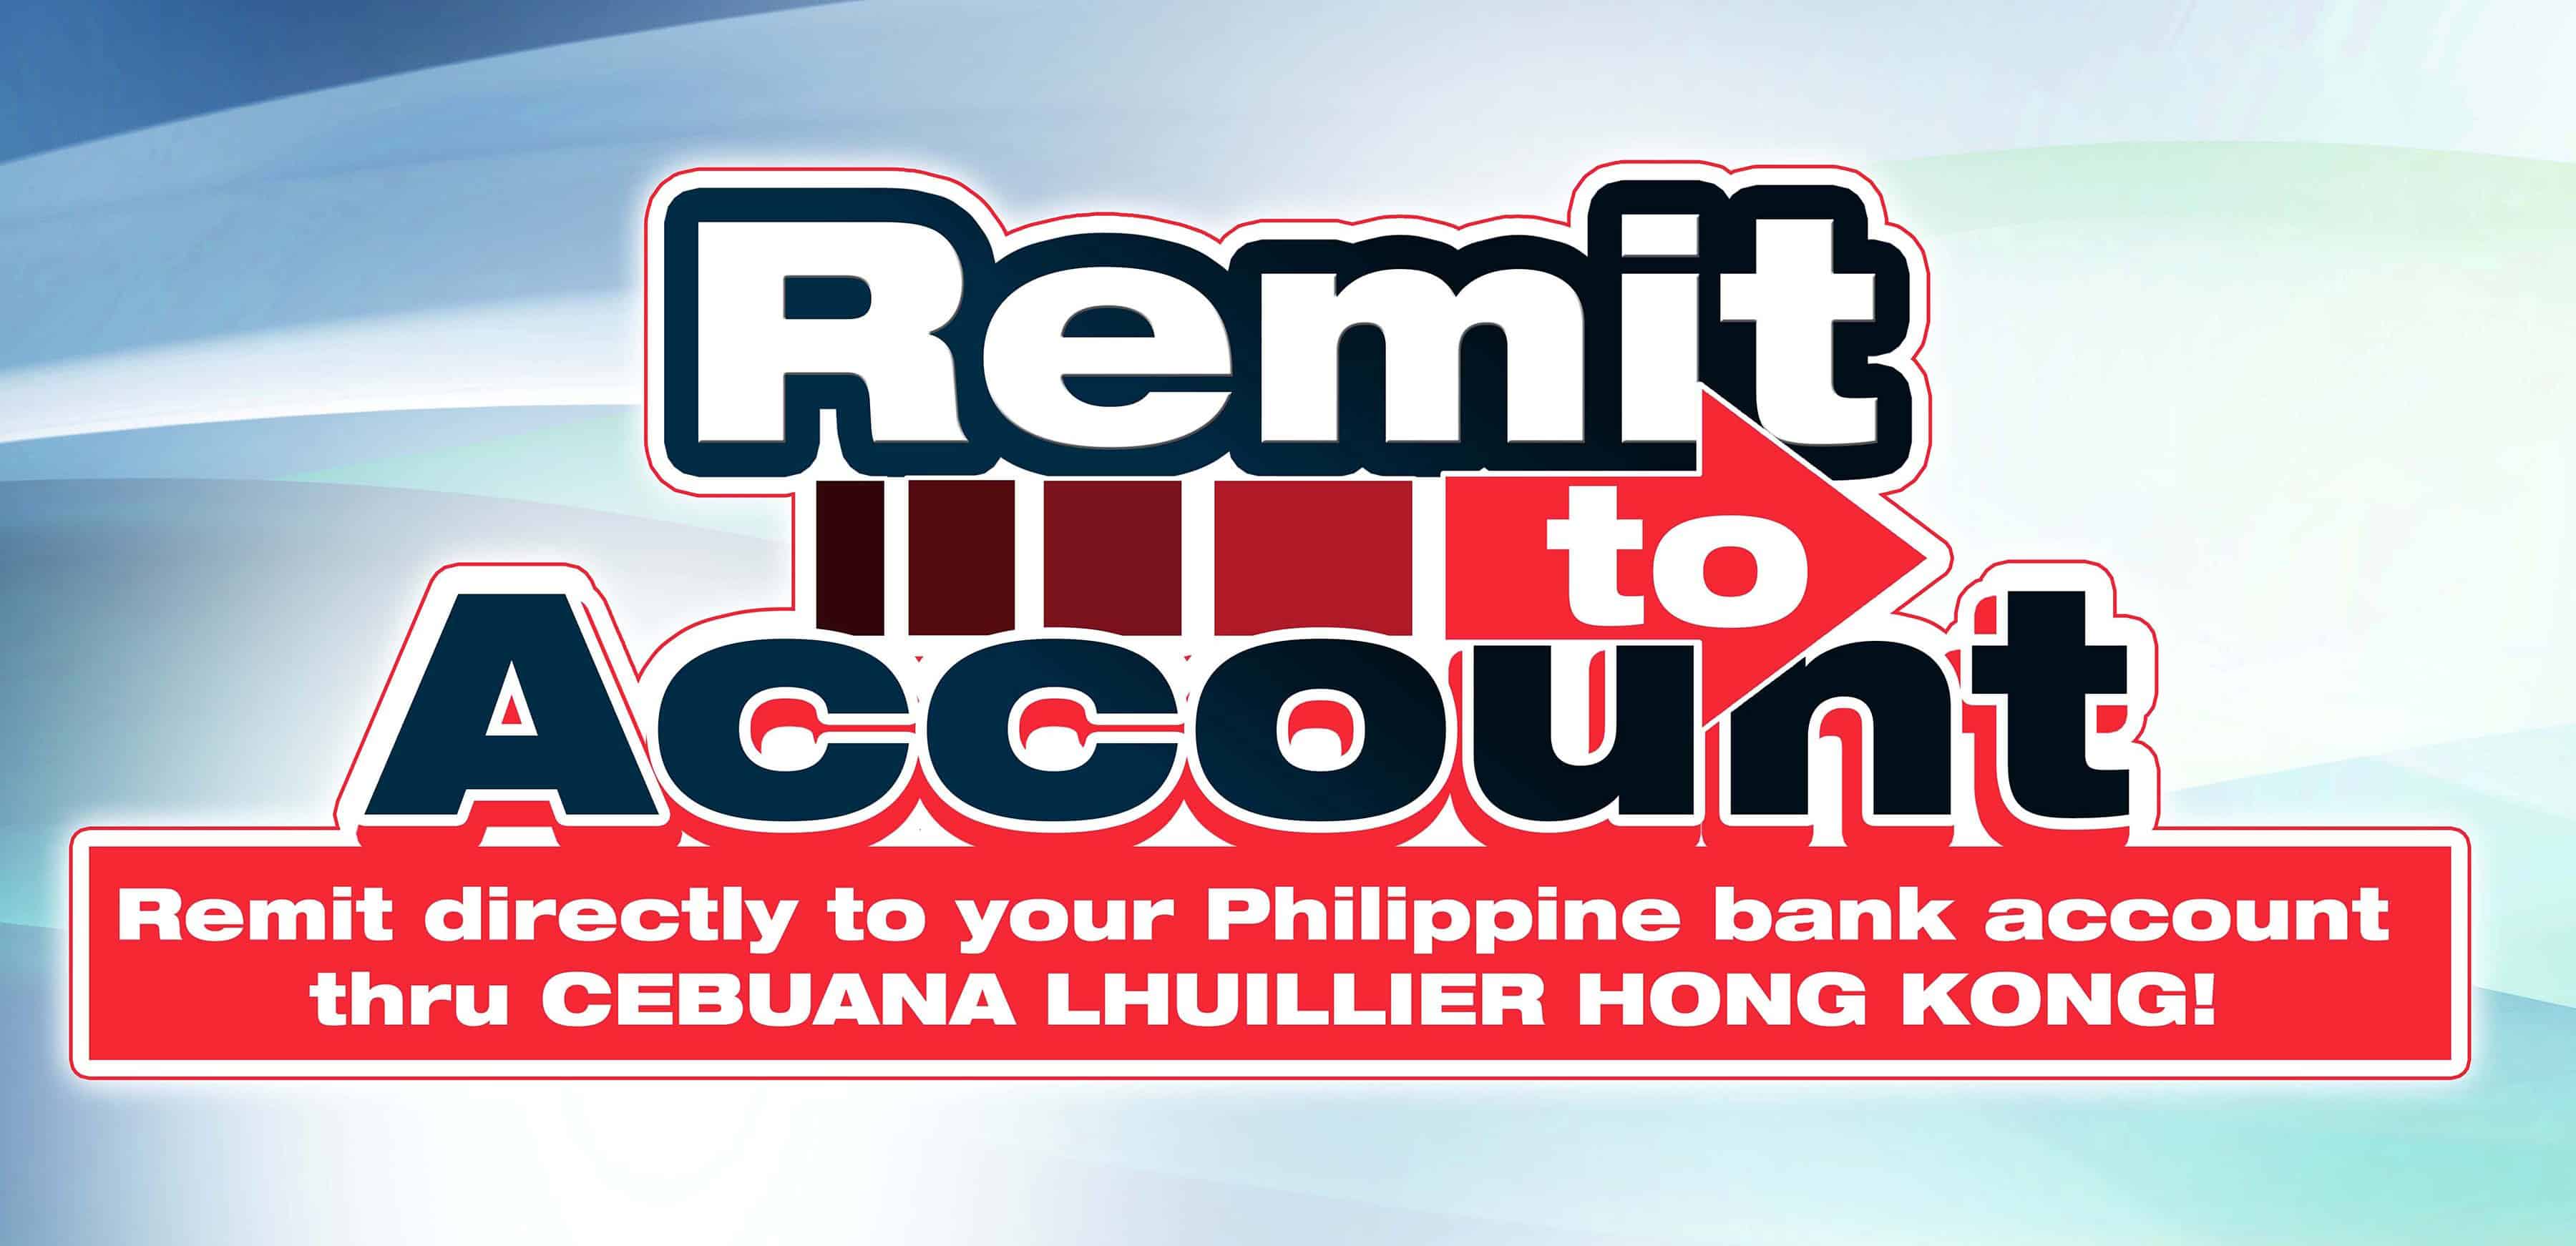 Cebuana Lhuillier Hong Kong now offers Remit to Account!